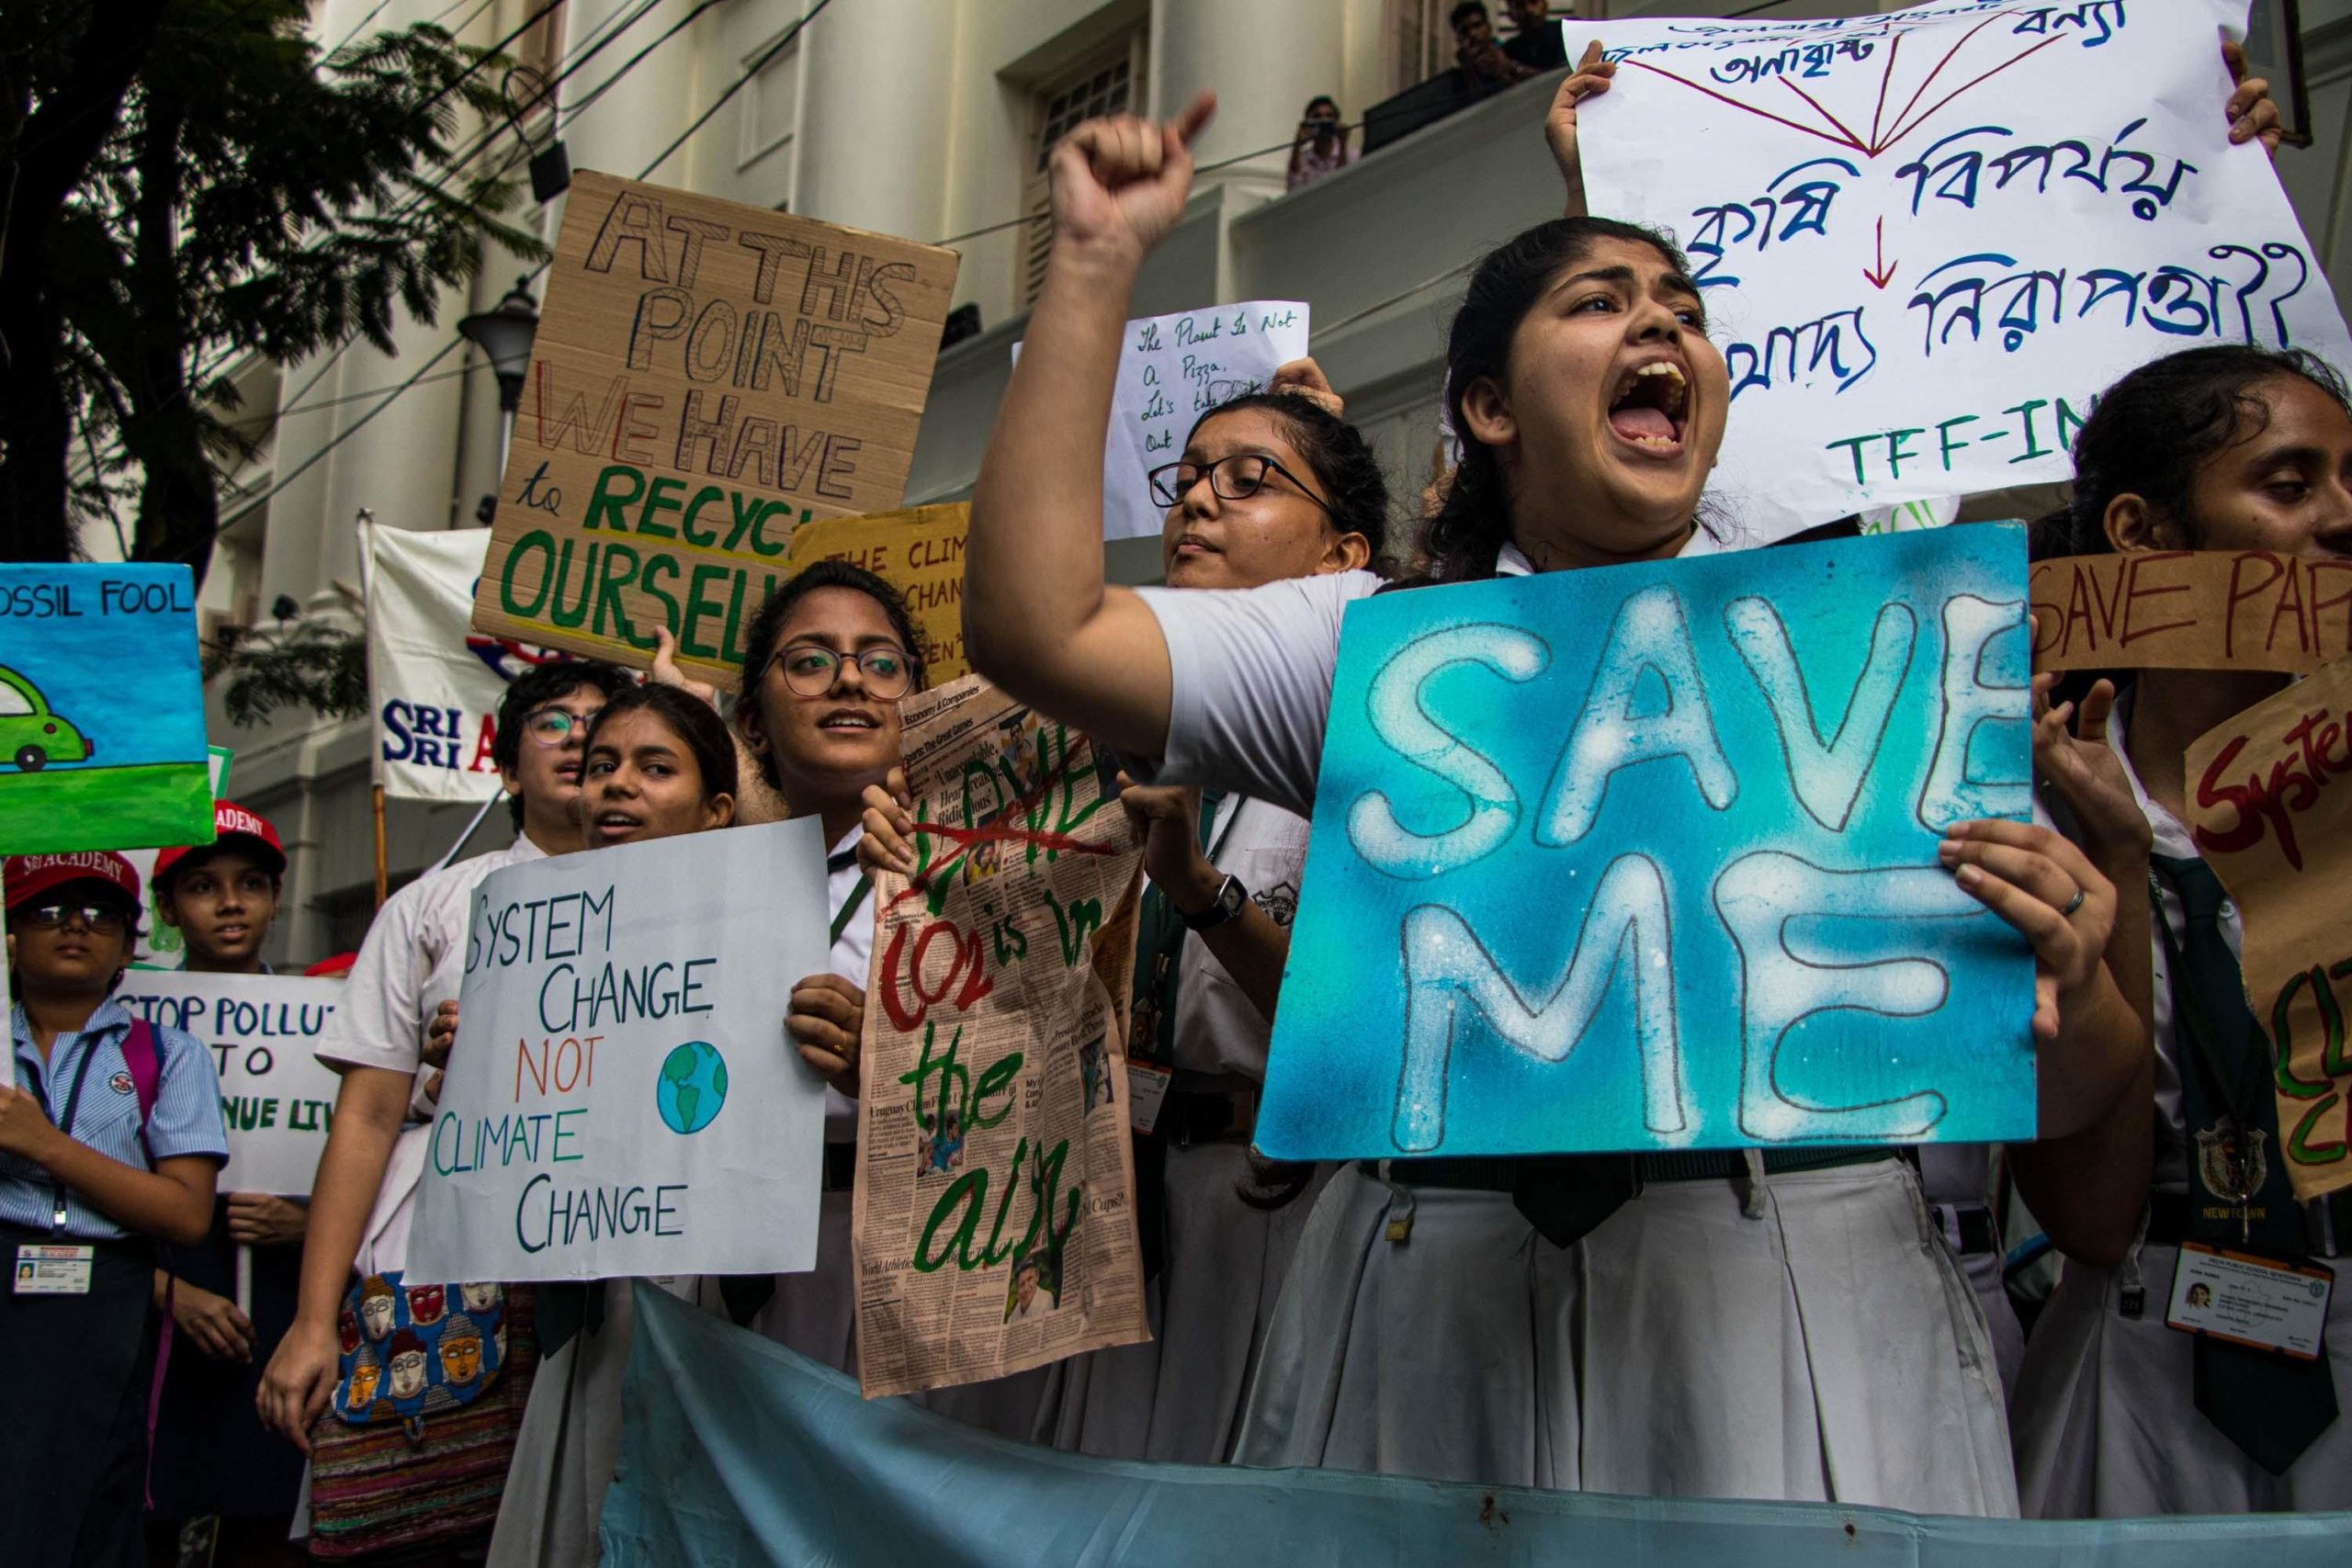 A Fridays for Future March for Climate Justice in Kolkata, India in September 2019. Climate groups in South Asia and across the world are demanding more urgent climate action at COP26.